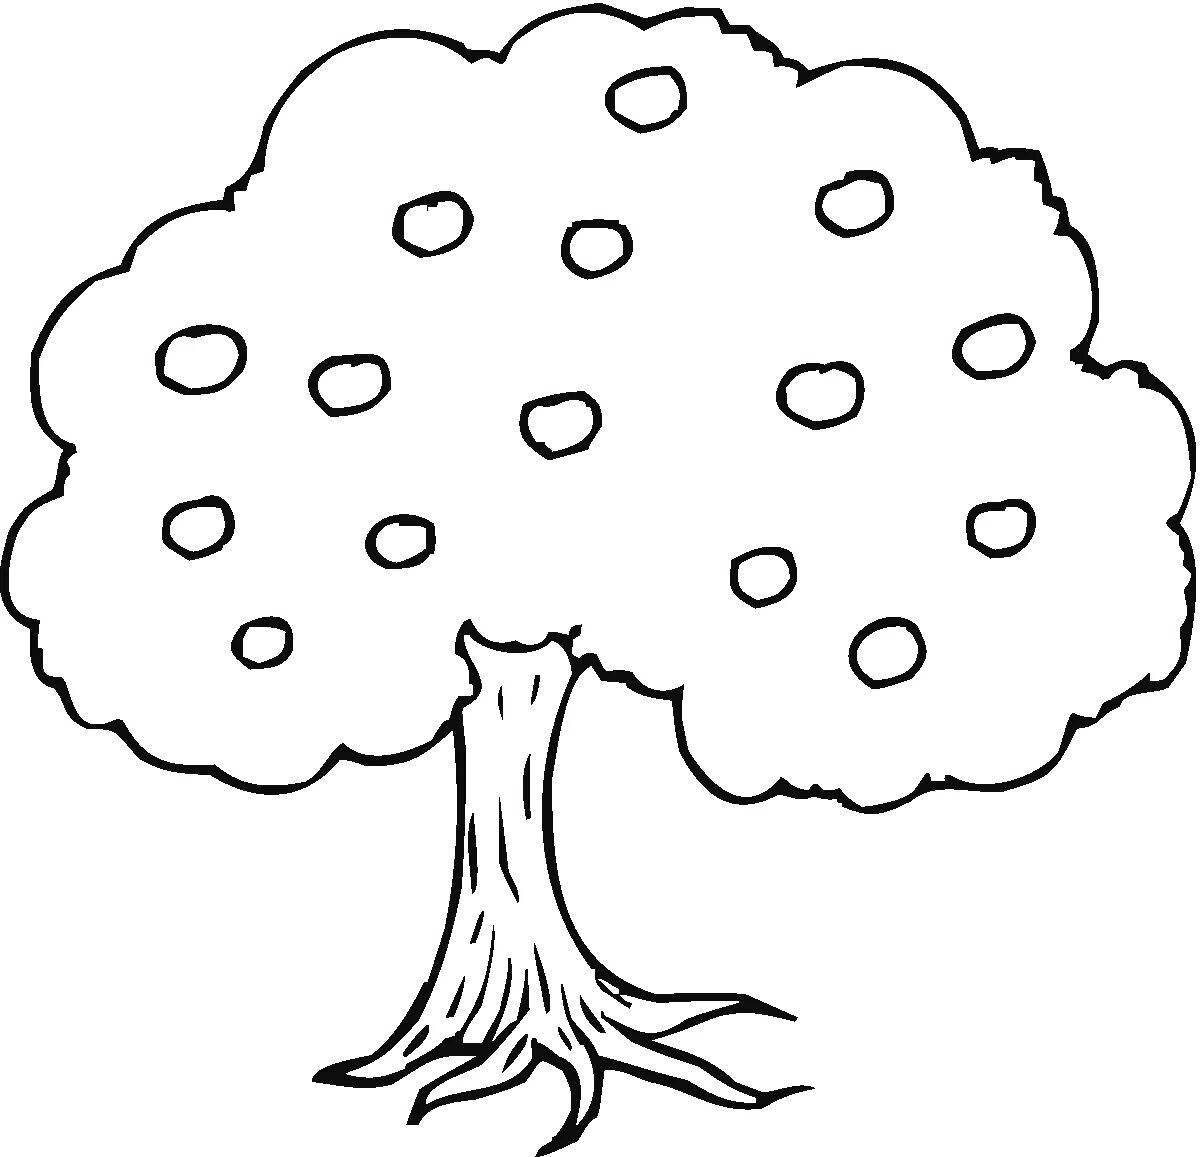 Drawing tree for kids #7